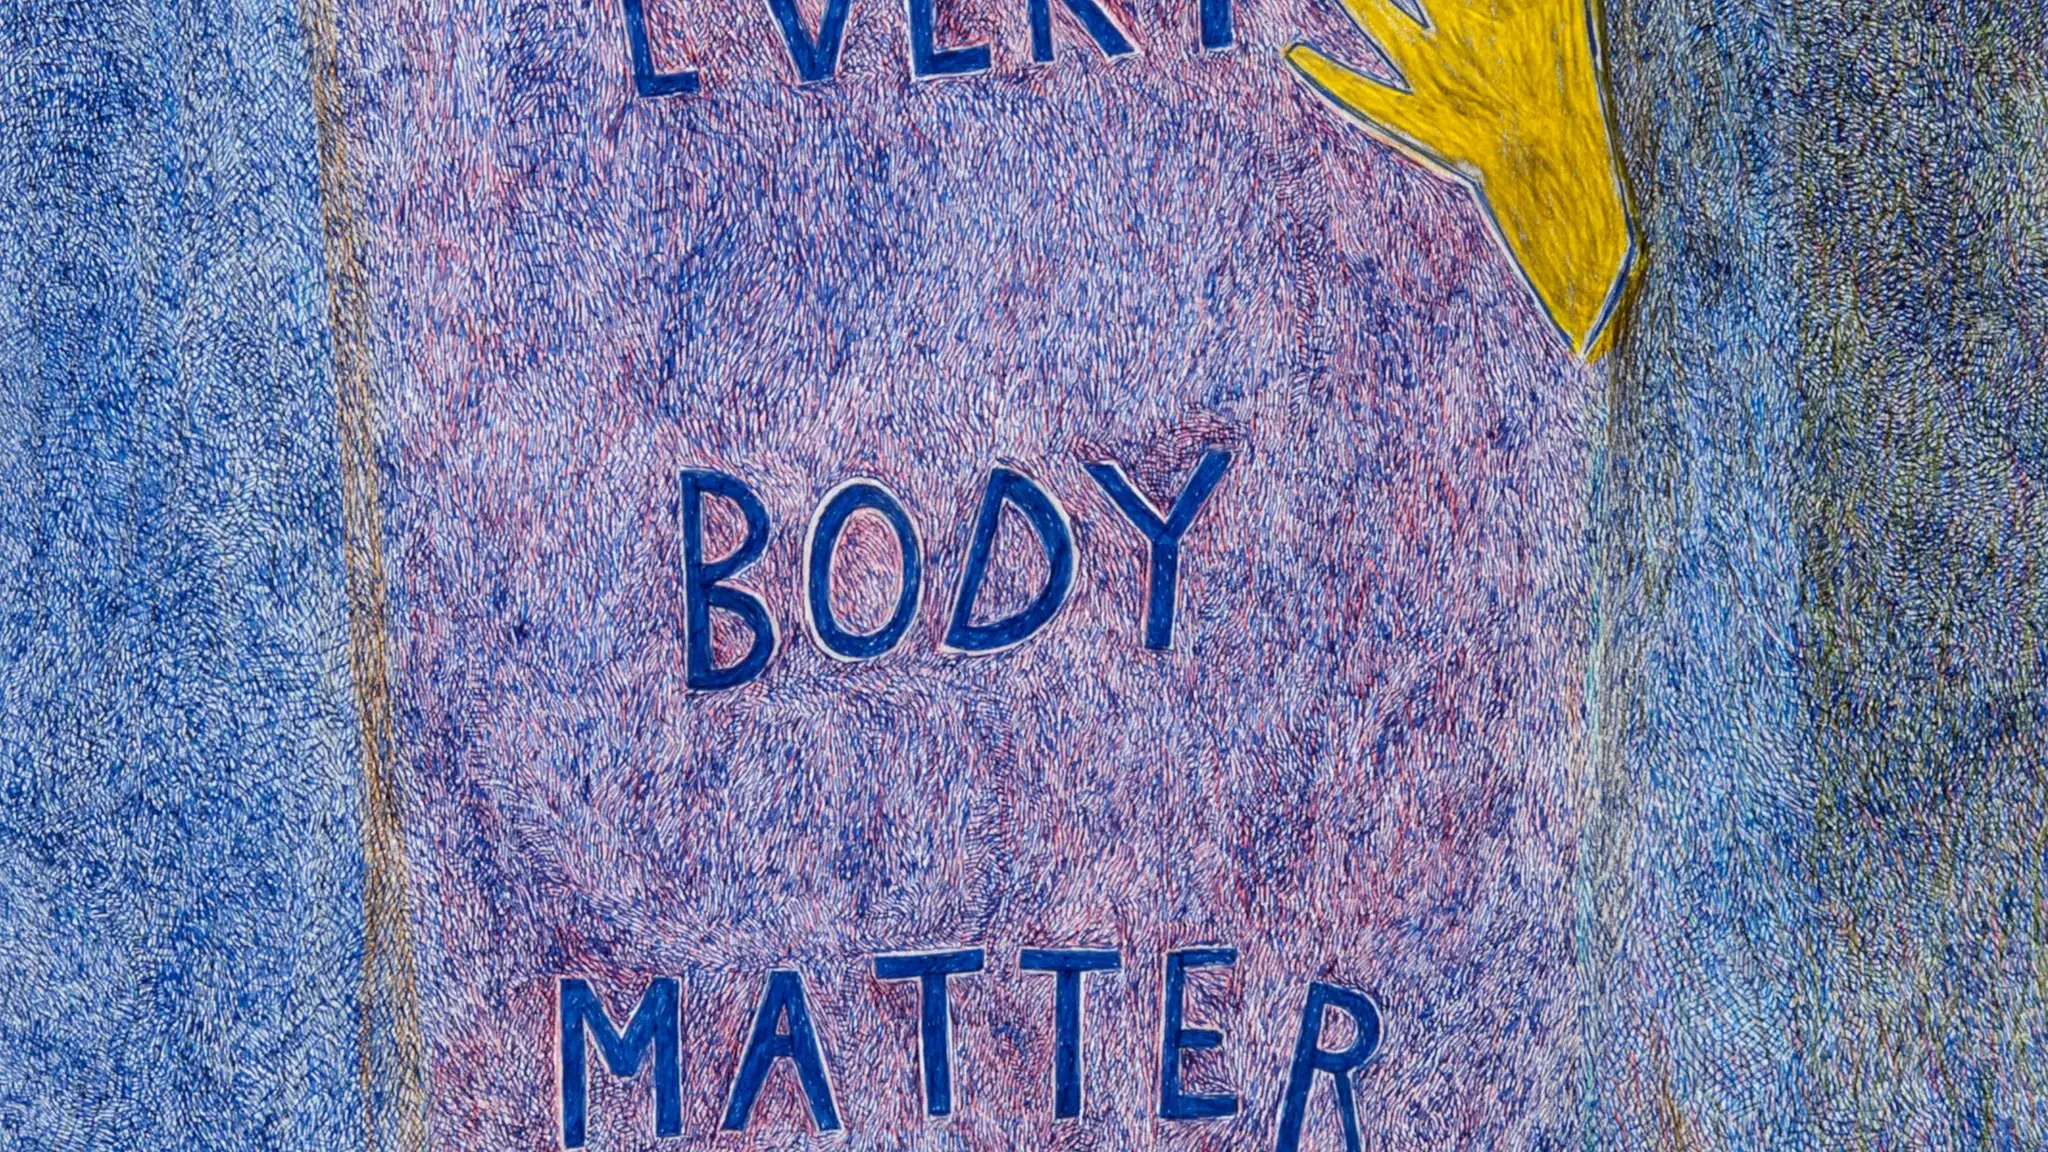 Detail from Anthony Campuzano&#39;s Every Body Matters #1, 2012. Photo courtesy of the artist.